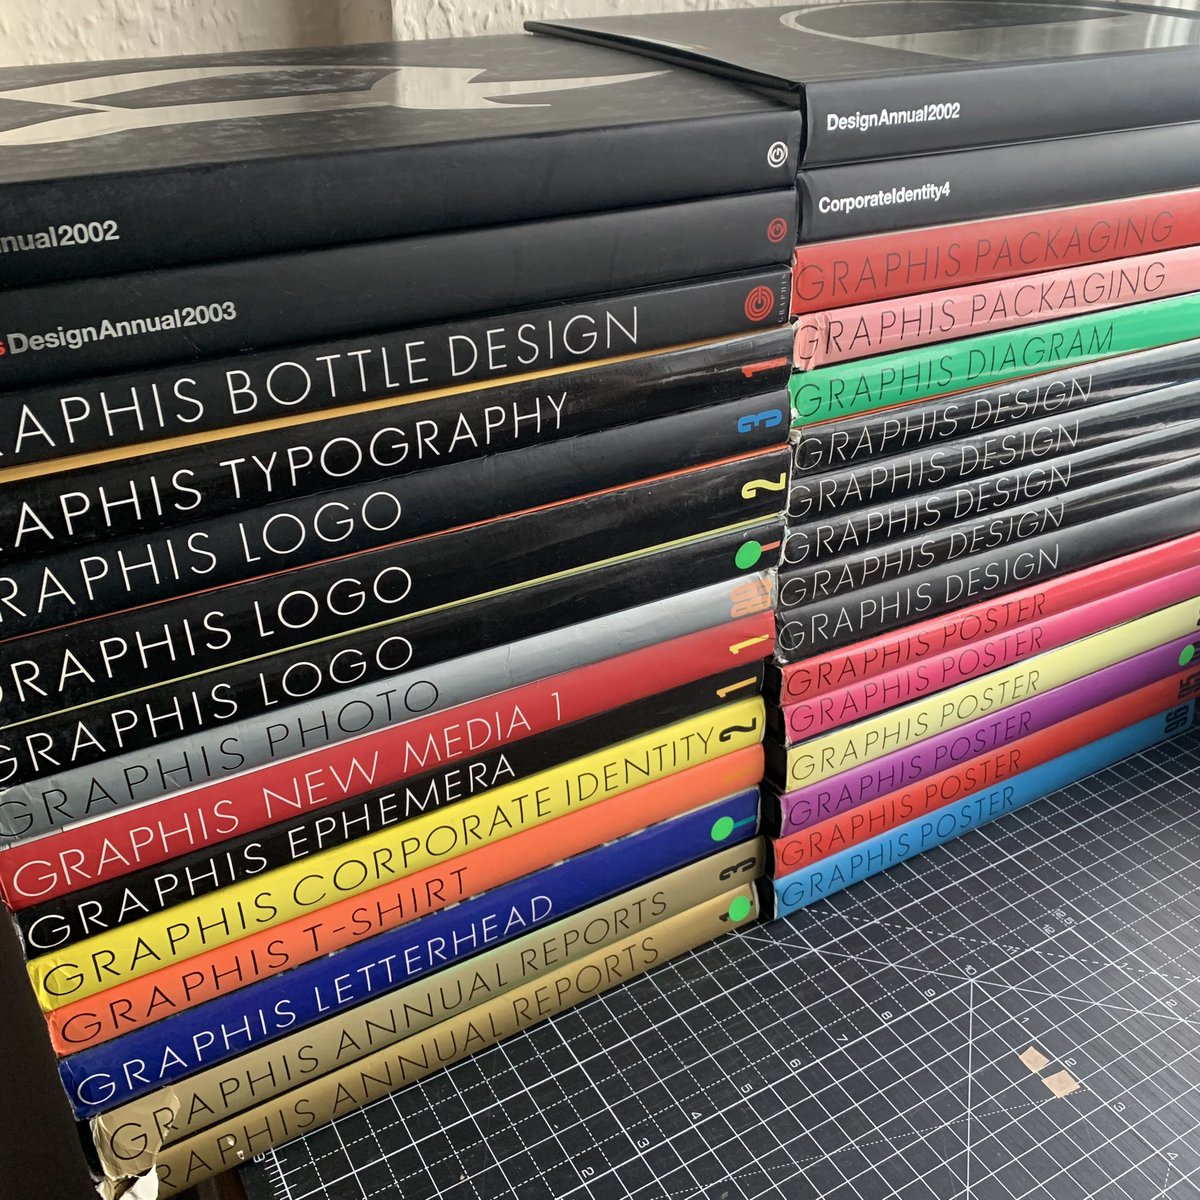 Today’s delivery…

Graphis, LOADS of Graphis!

STOCK WANTED - DM me if you have (or know anyone who has) things for sale.

#theprintarkive #graphicdesignbook #designinspo #posterdesign #bottledesign #packagingdesign #logodesigning #diagramdesign #tshirtdesigns @graphis_inc